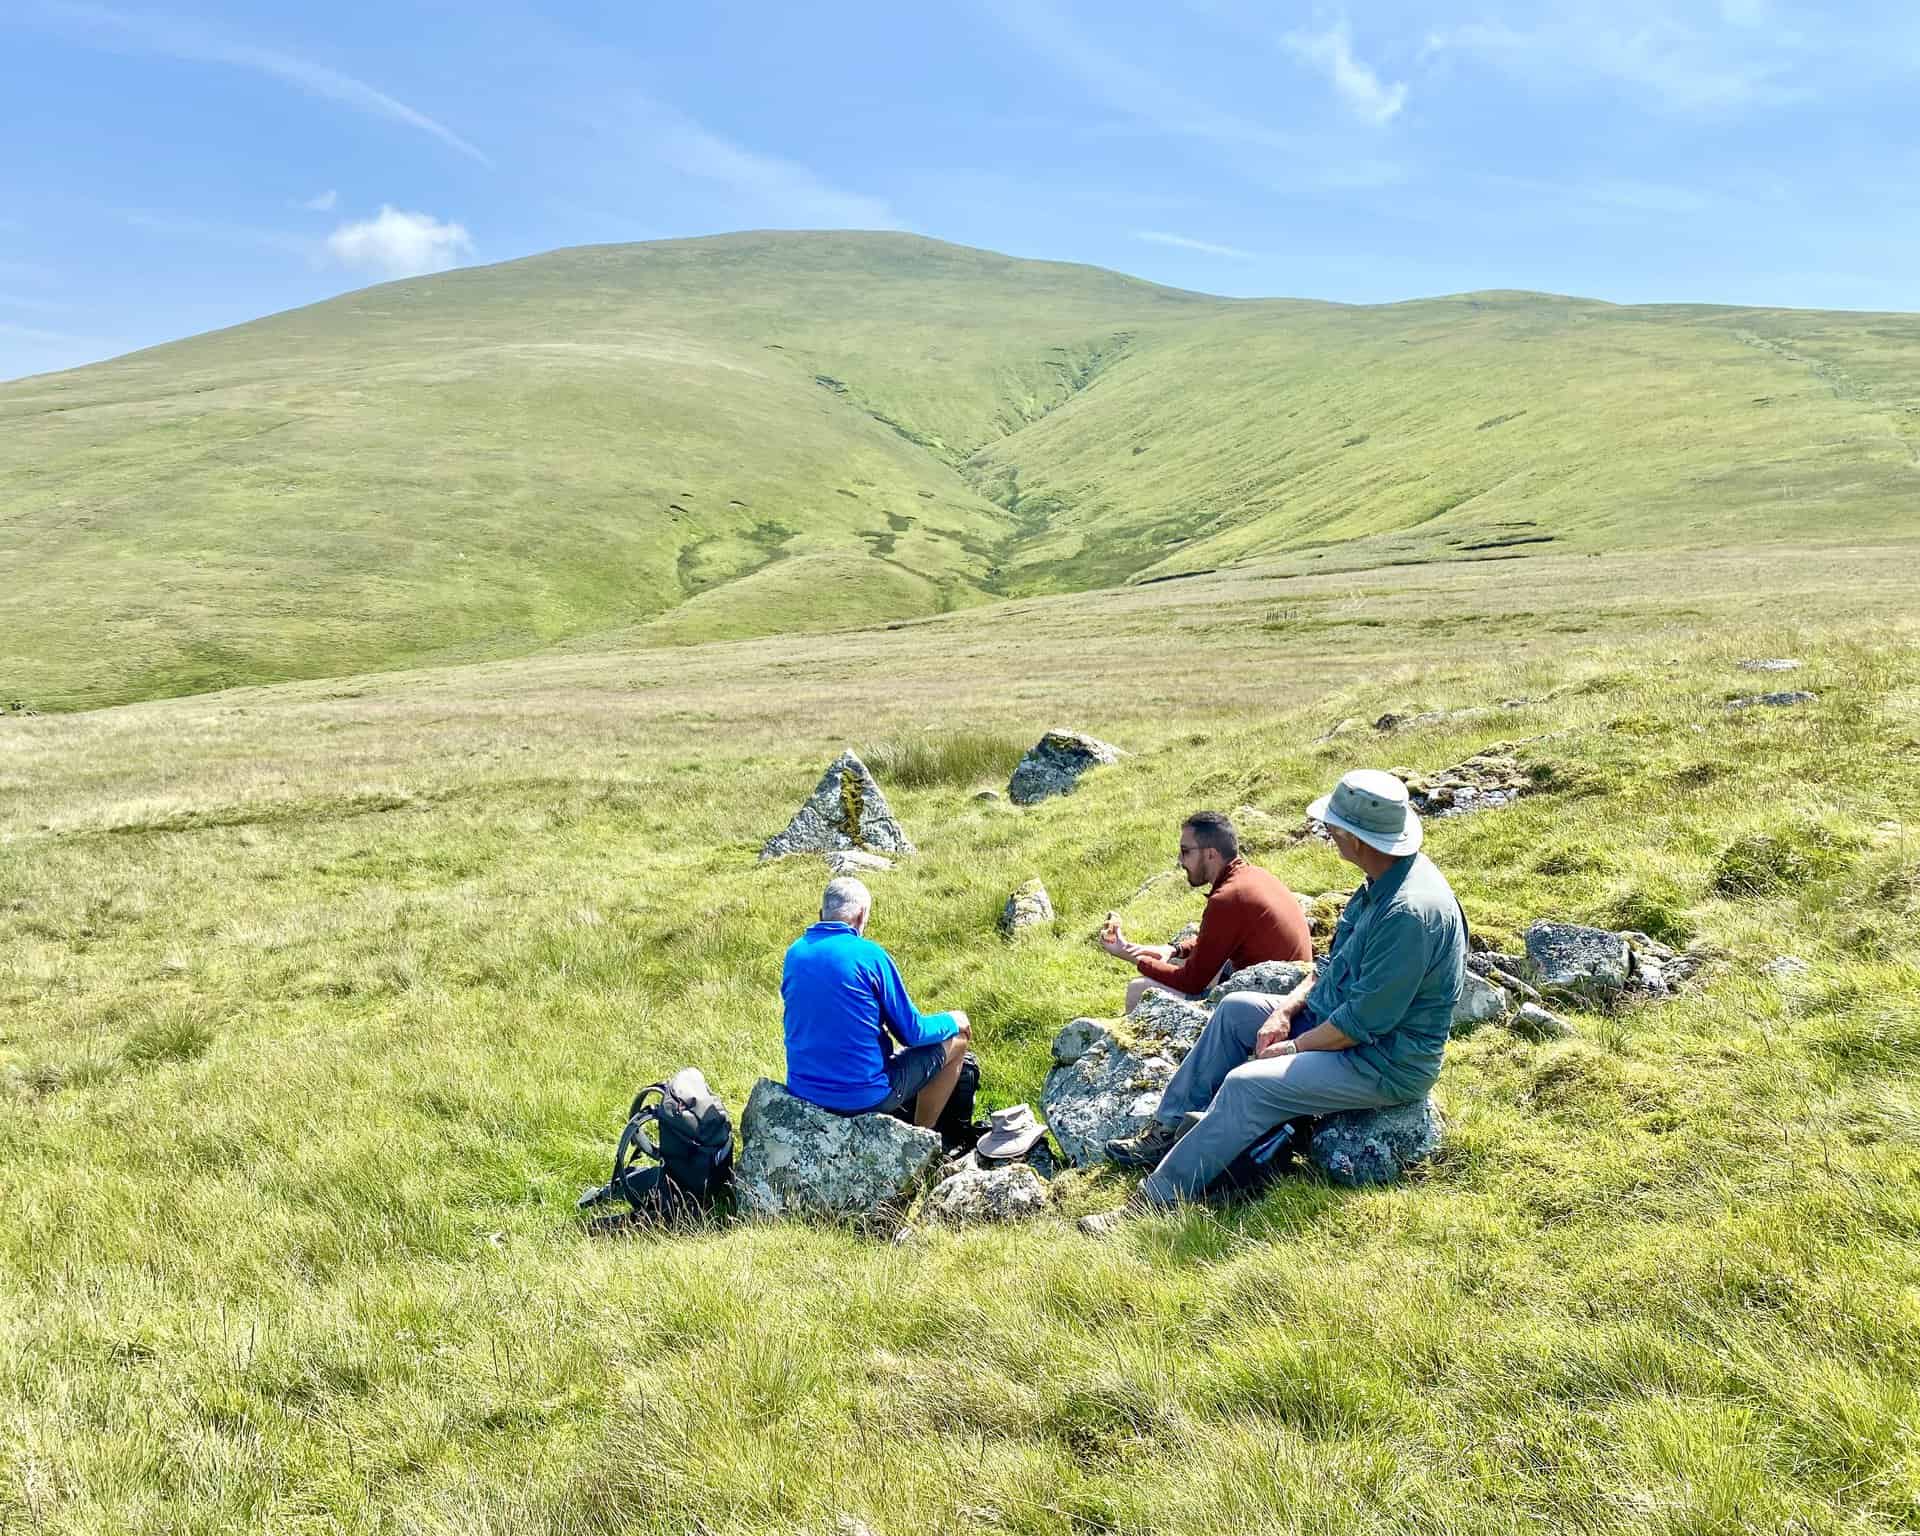 Time for a break near Calfhow Pike before we head south-east up to Great Dodd.